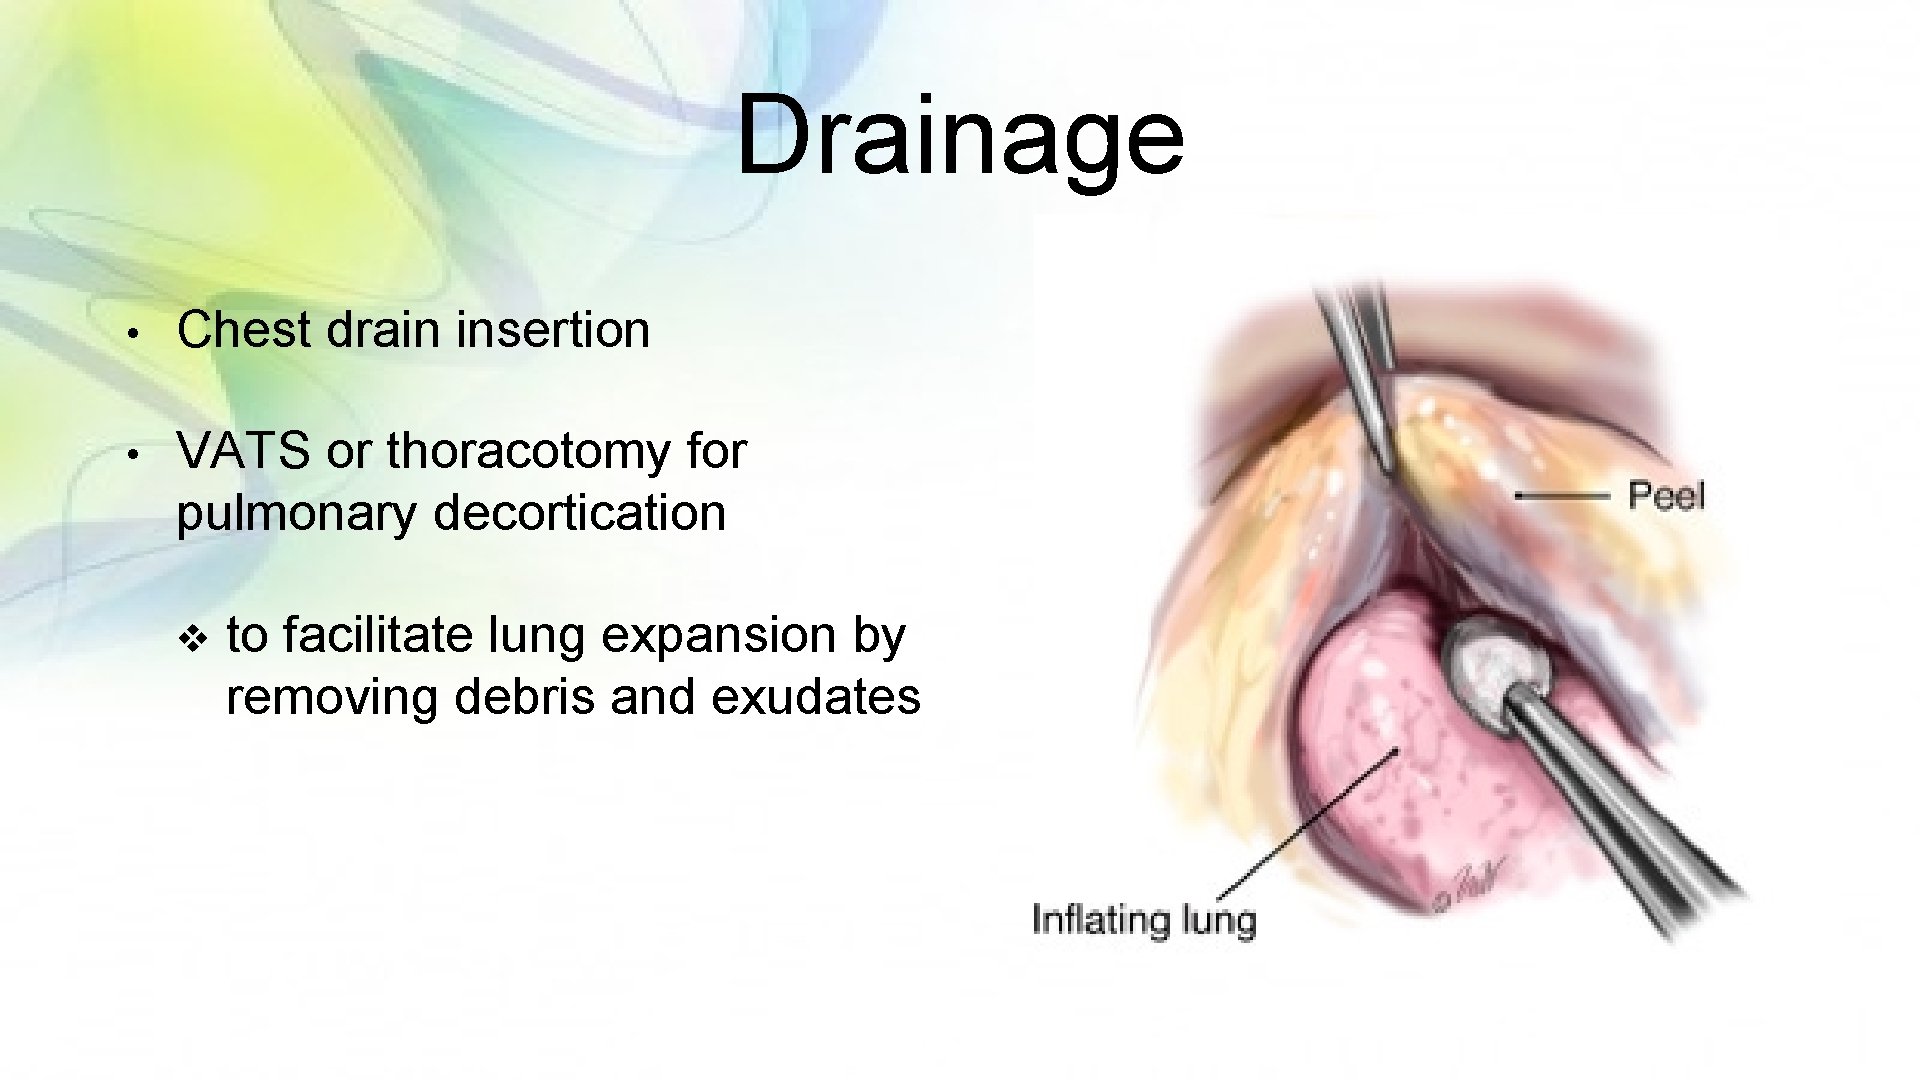 Drainage • Chest drain insertion • VATS or thoracotomy for pulmonary decortication v to